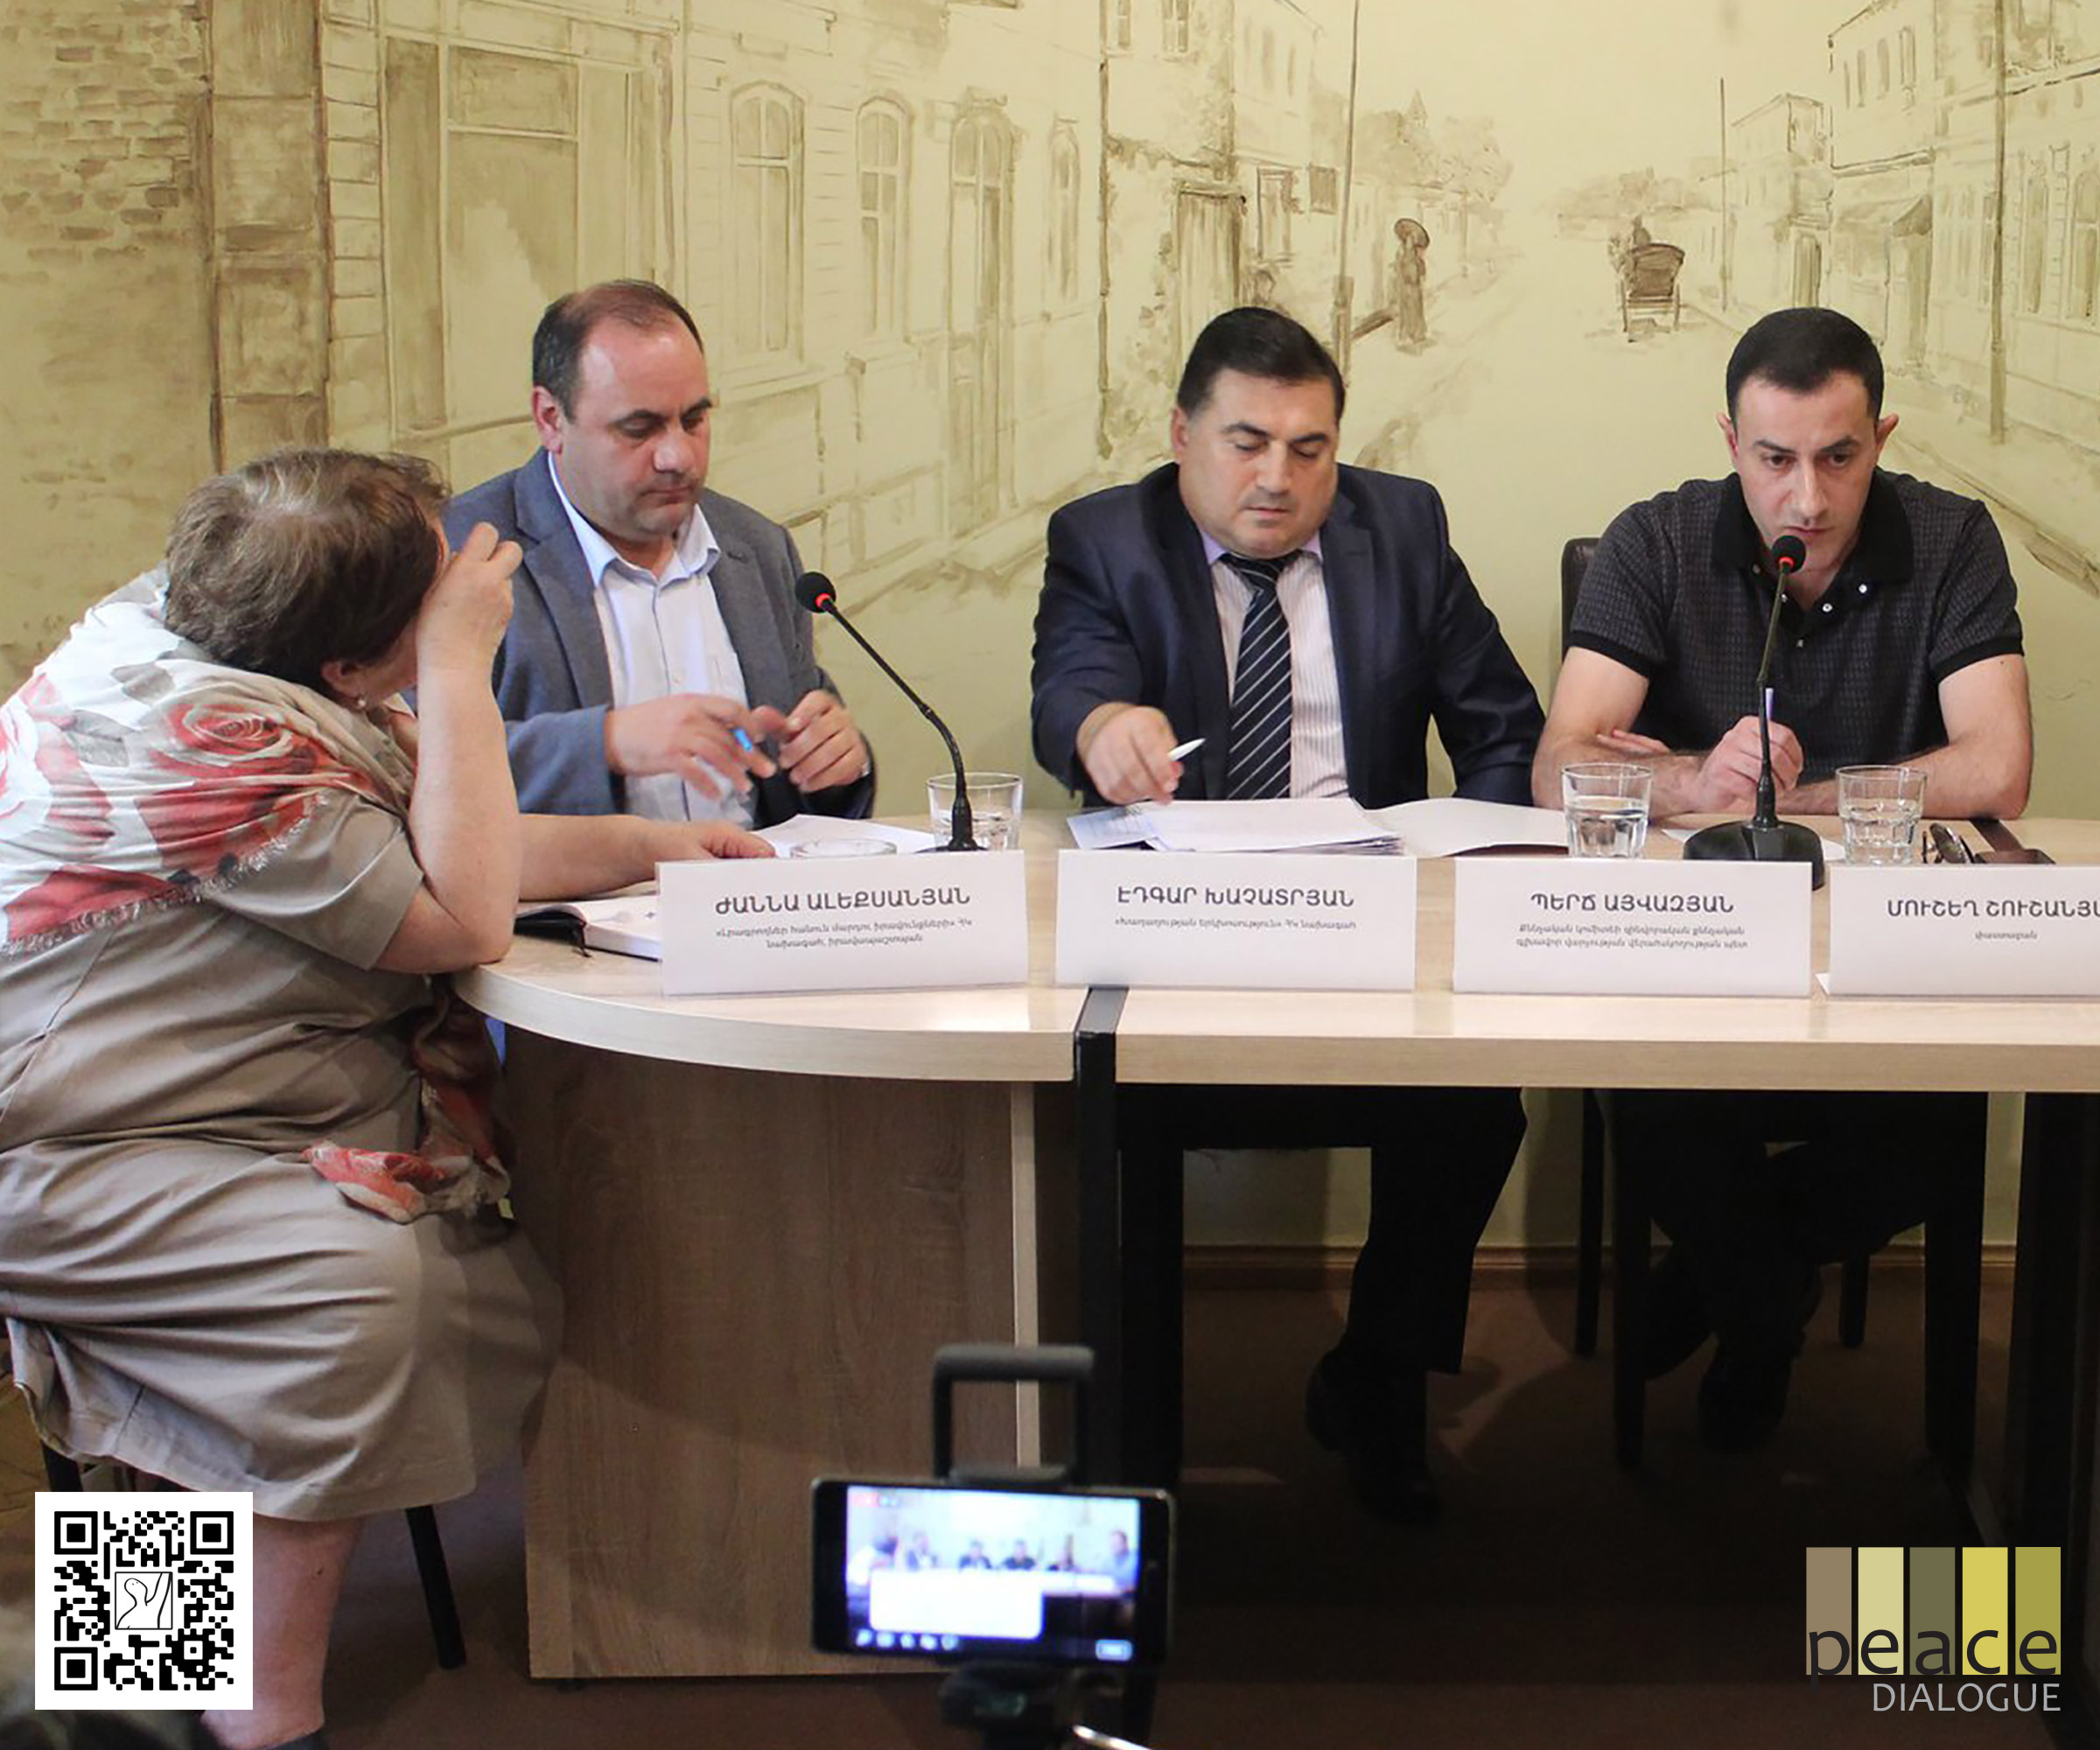 A discussion entitled Investigation of criminal cases initiated in non-combat deaths in the army: is comprehensive, thorough and impartial investigation of cases guaranteed? took place on 12 September 2019 in Article 3 Club. The event was the result of cooperative efforts between Peace Dialogue NGO and Article 3 Club.